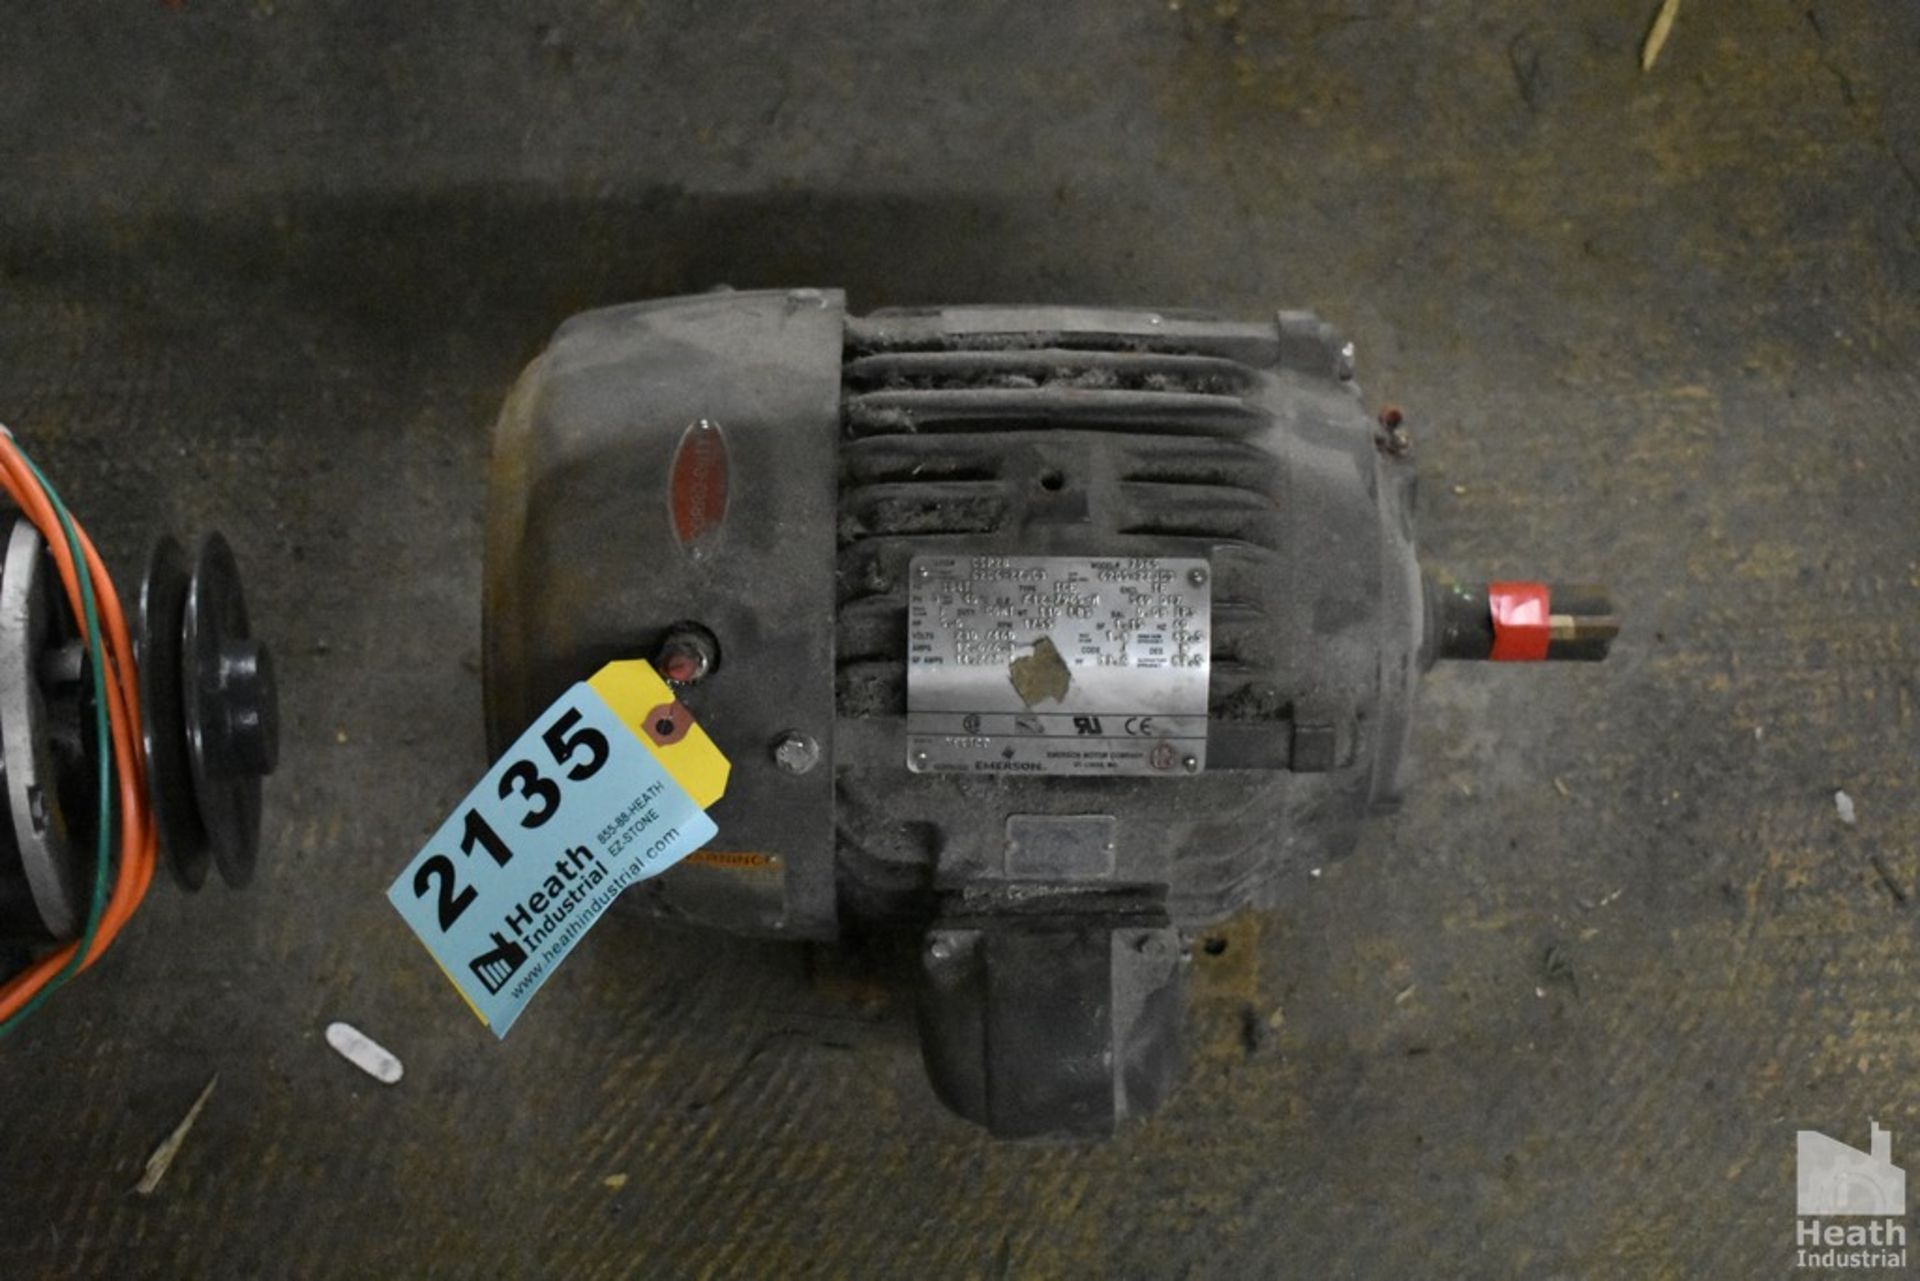 EMERSON MODEL 7965, TYPE TCE, 3-PHASE, 5HP, 230/460 VOLTS, 1,750 RPM MOTOR